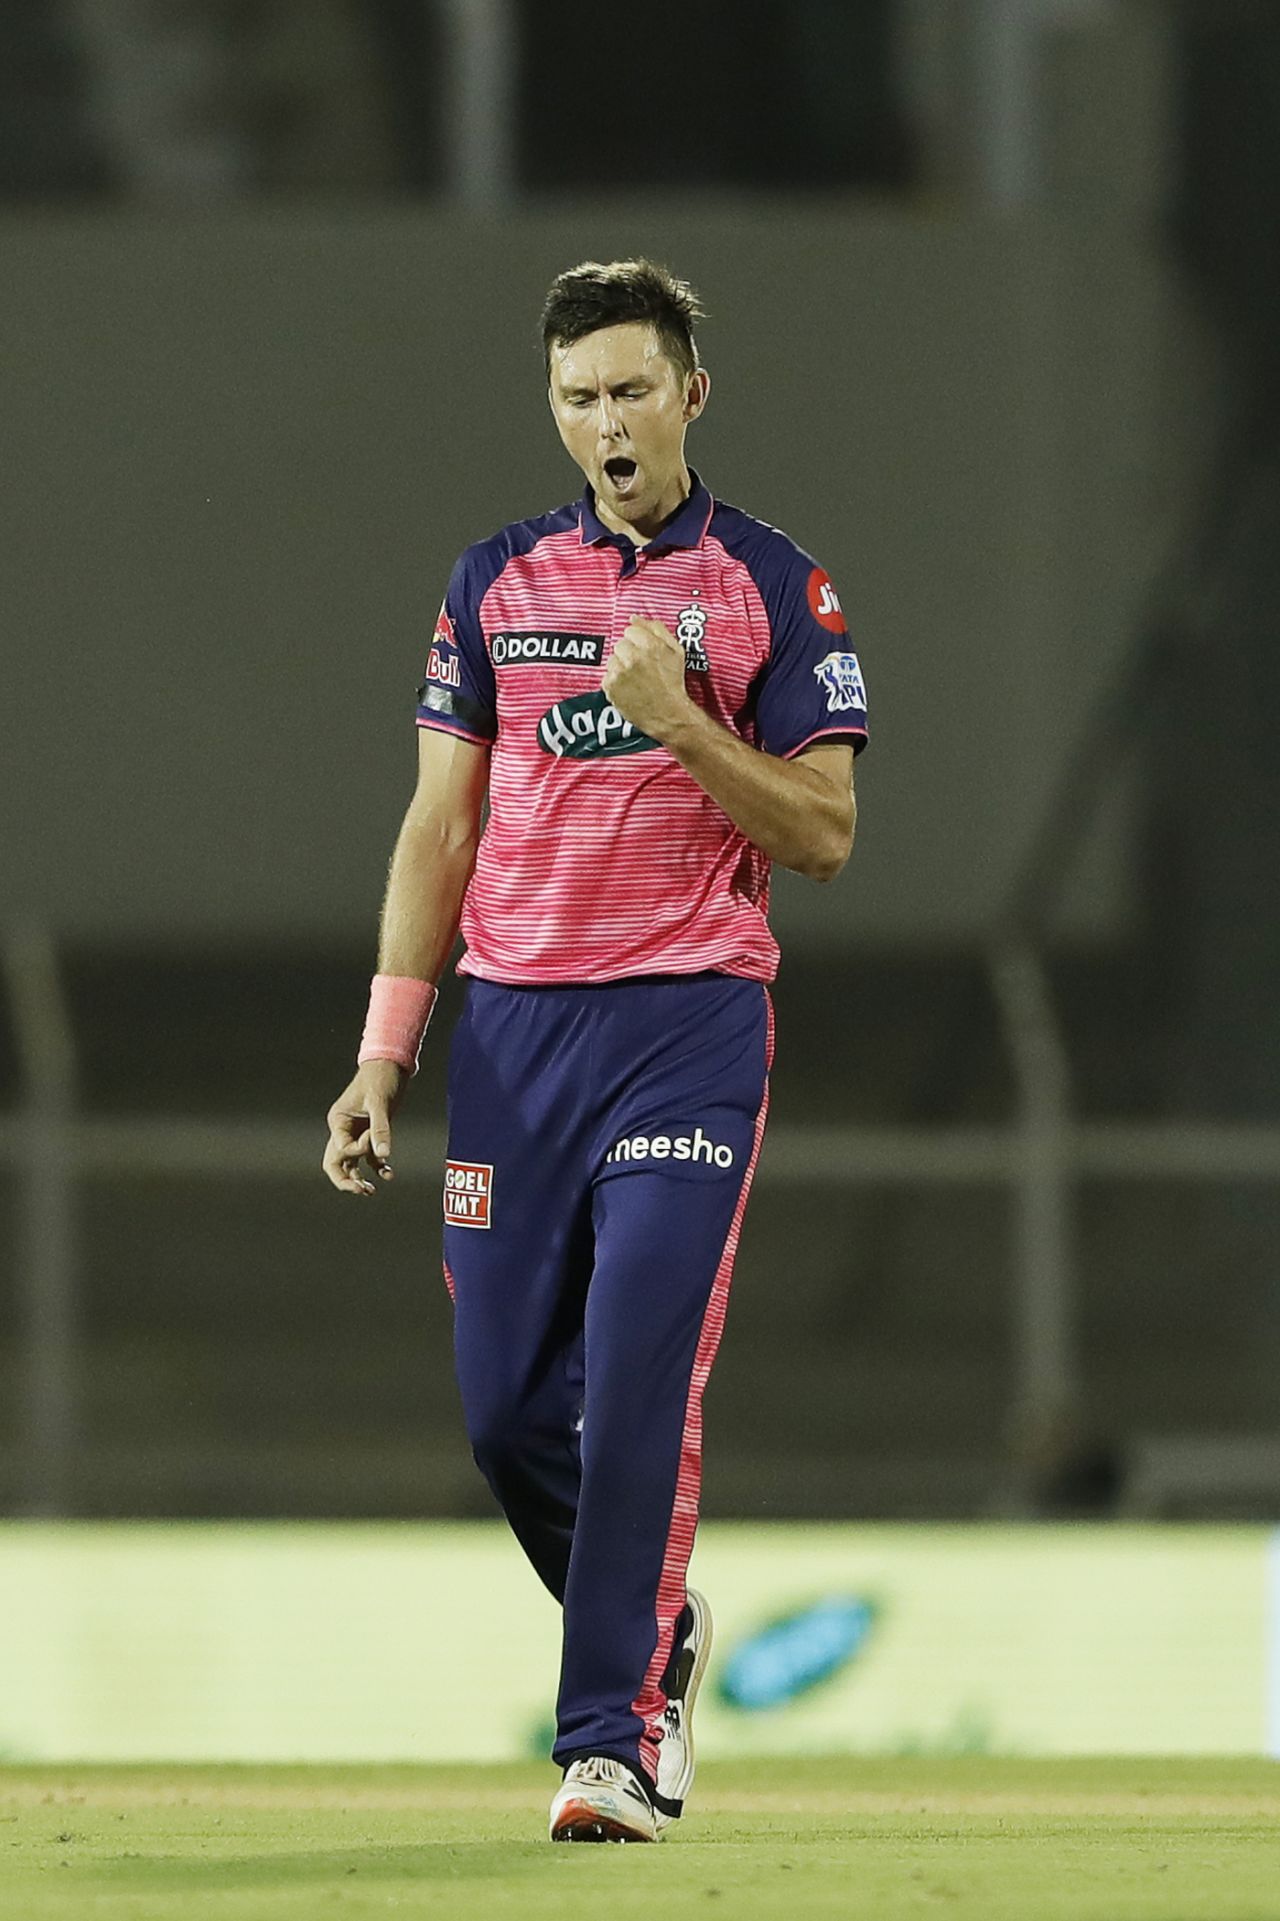 Trent Boult is a happy bowler after snagging Quinton de Kock, Lucknow Super Giants vs Rajasthan Royals, IPL 2022, Brabourne Stadium, Mumbai, May 15, 2022